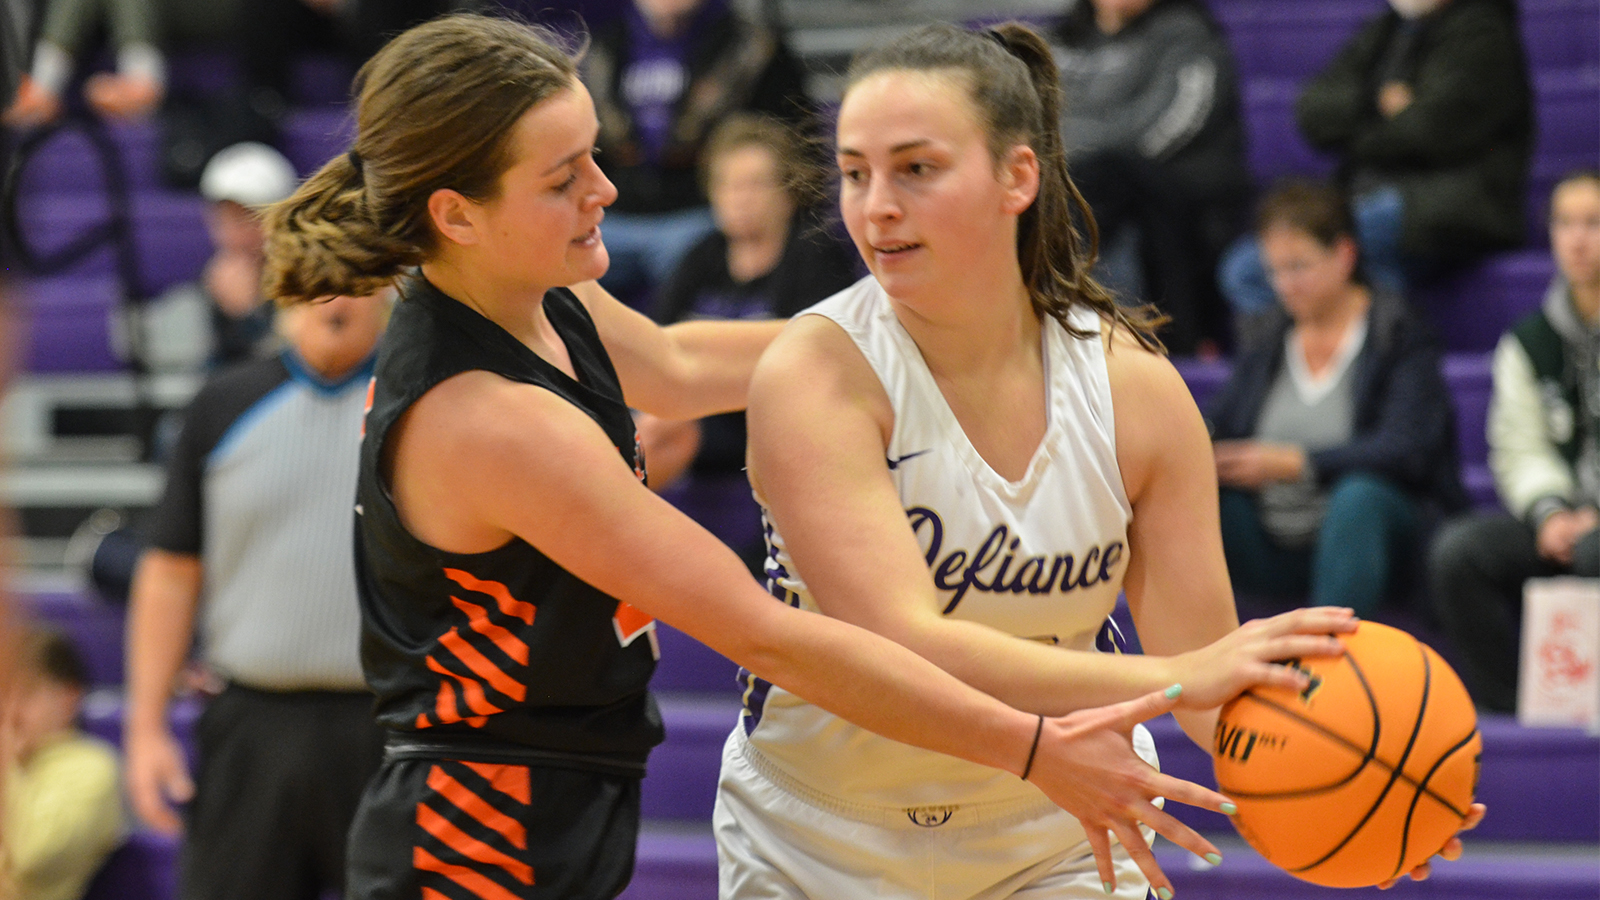 Defiance drops Mount St. Joseph on New Year’s Eve for fifth straight win